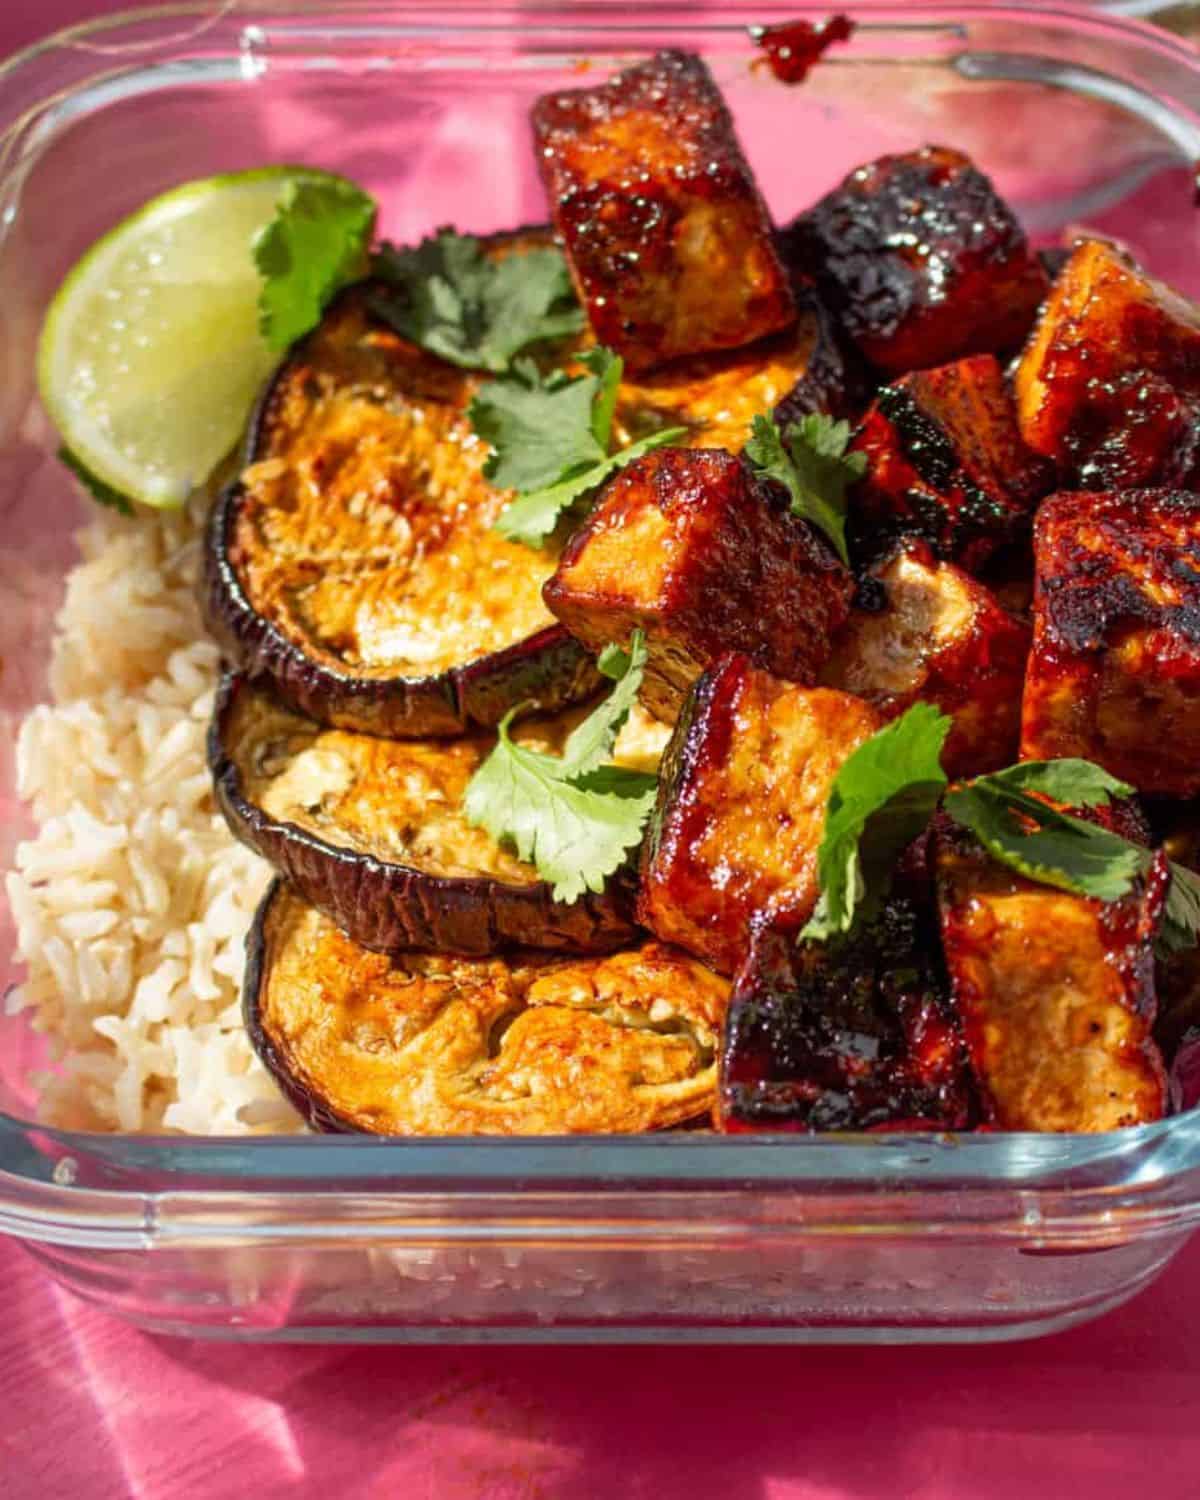 A square, glass meal prep container filled with rice, roasted aubergine rounds, cripsy tofu and a wedge of lemo and topped with coriander..